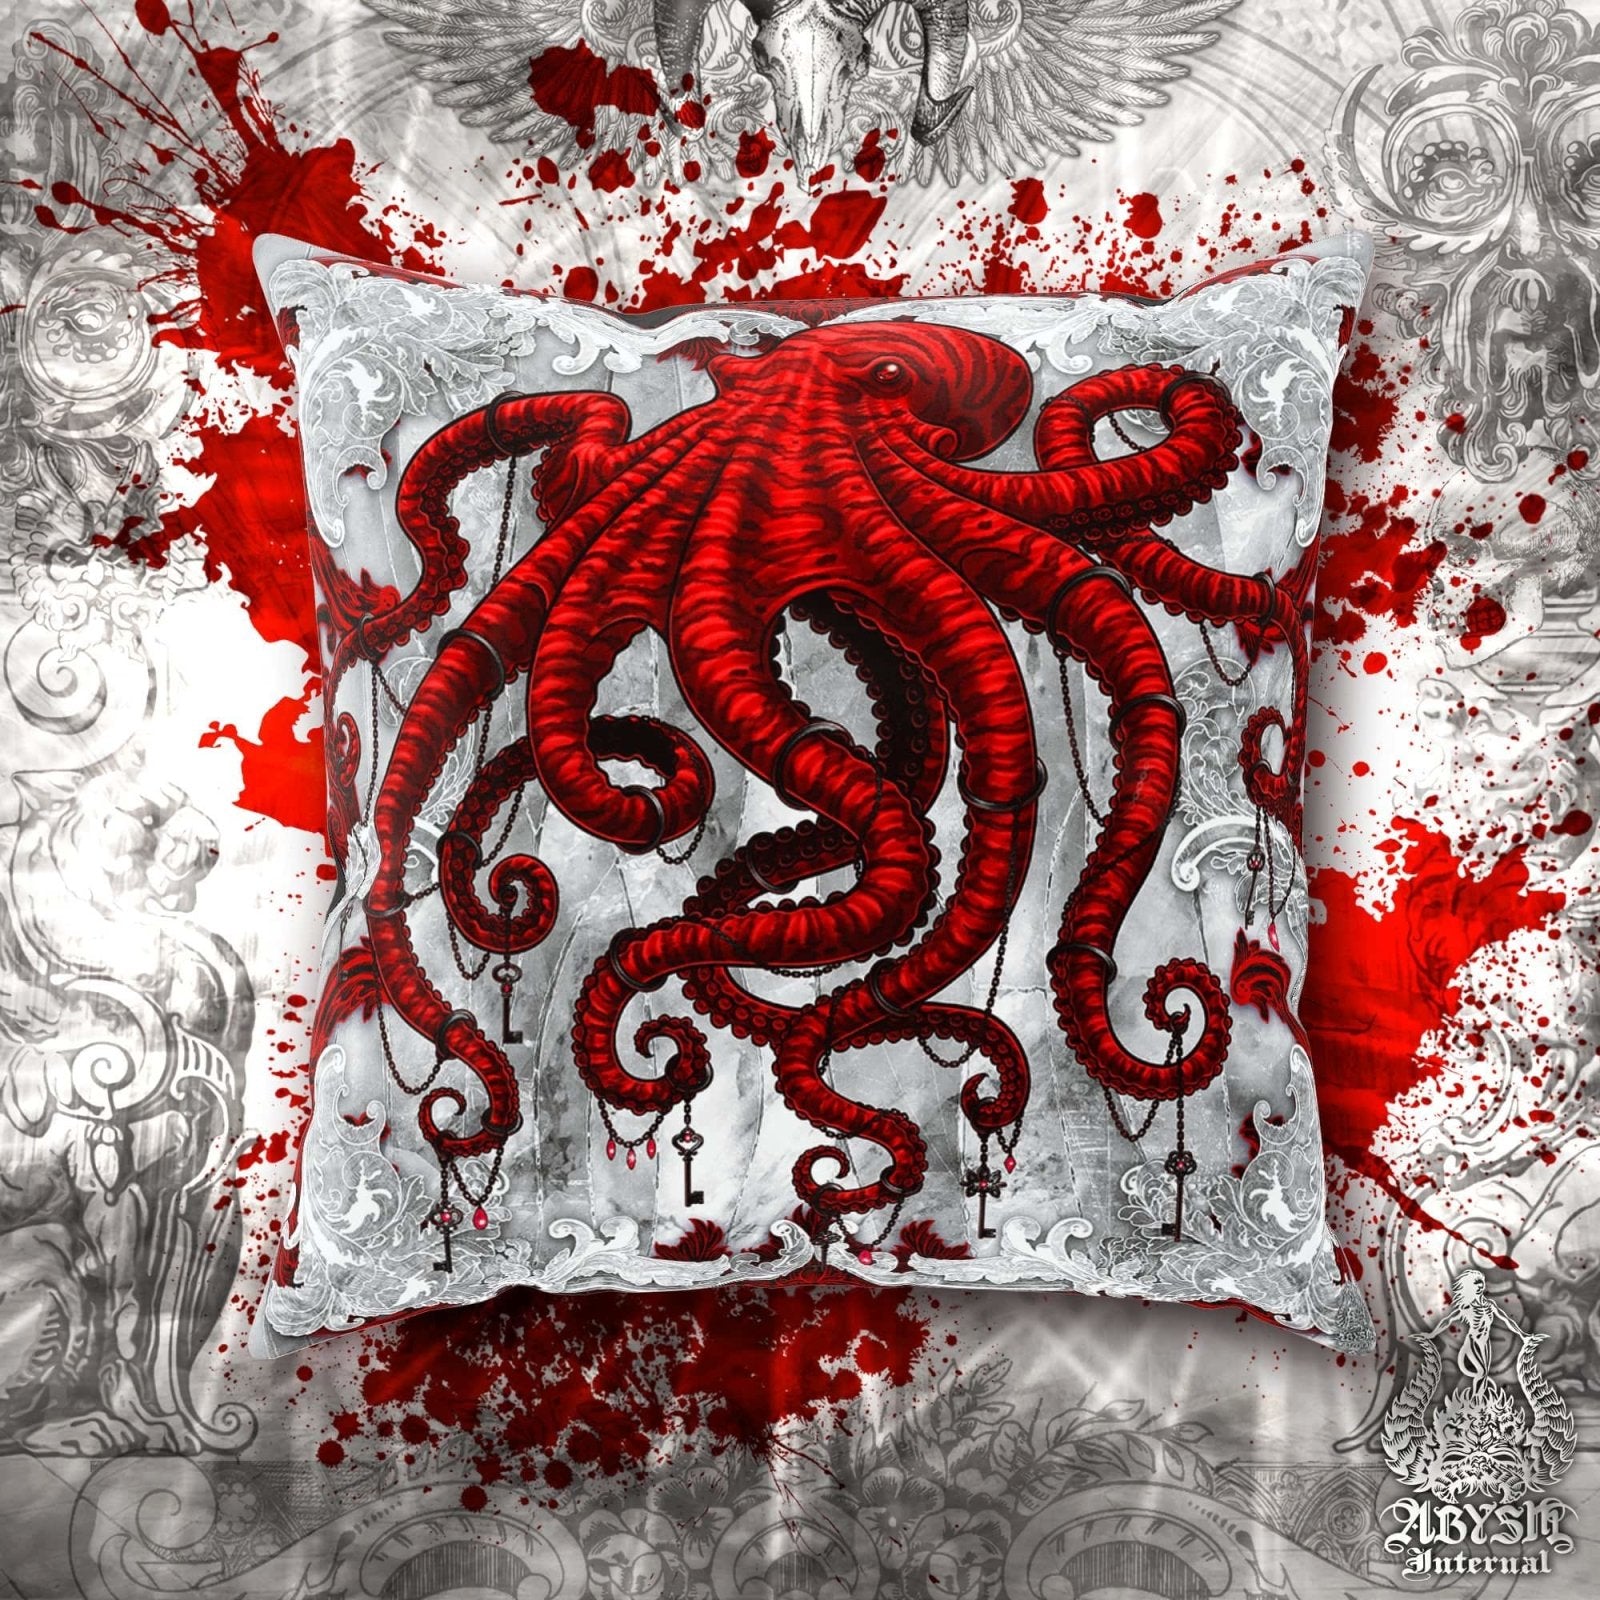 Gothic Throw Pillow, Decorative Accent Cushion, Goth Room Decor, Dark Art, Alternative Home - Bloody White and Red Octopus - Abysm Internal